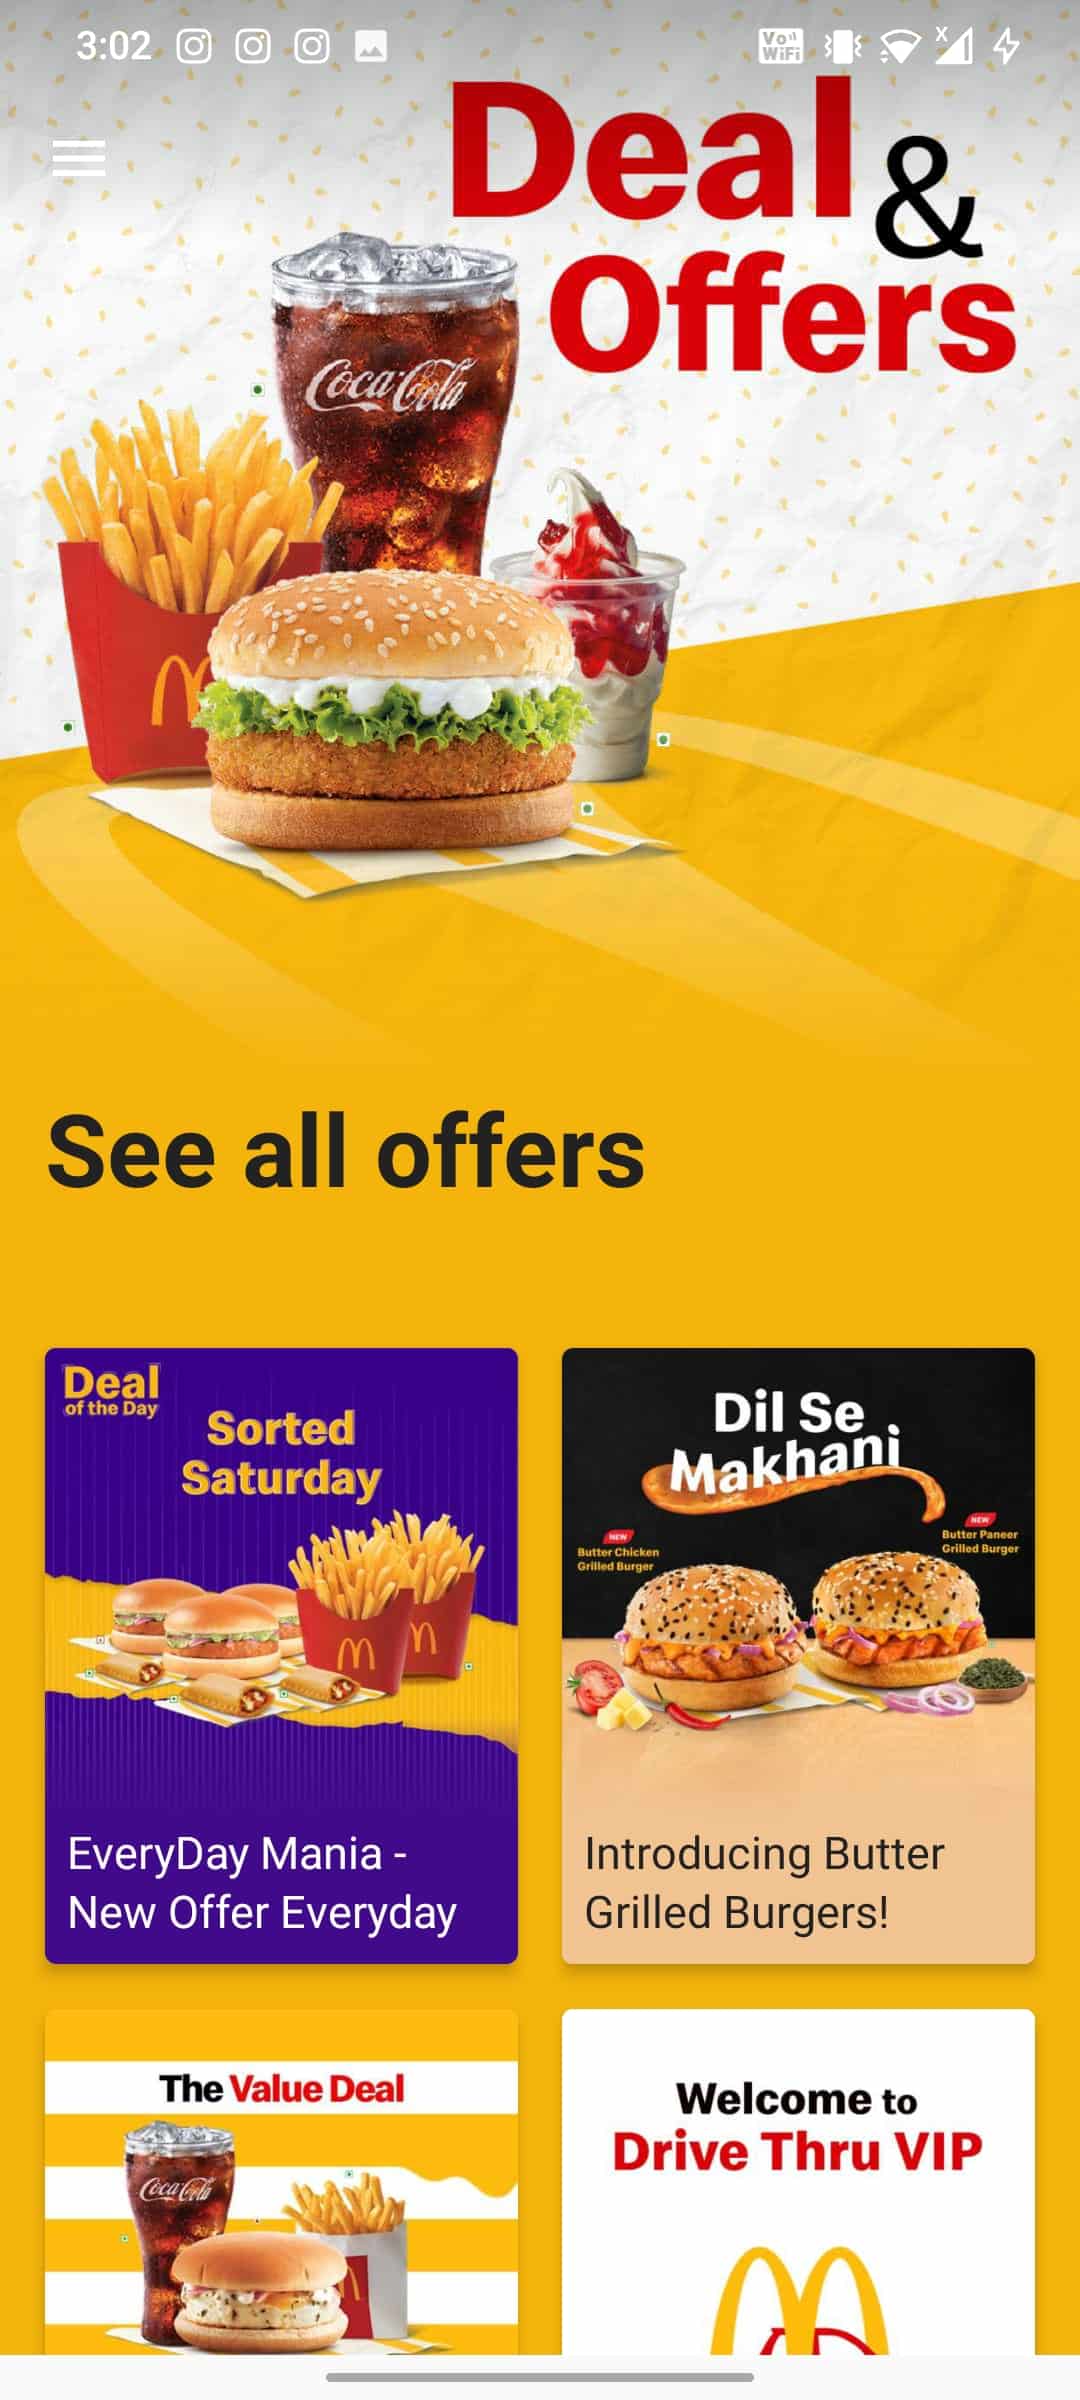 When you download the McDonald's app and sign up for the first time, you get a free burger, shake or any other dish as a welcome gift. | turn on notif on McDonald's app | claim your McDonald's rewards